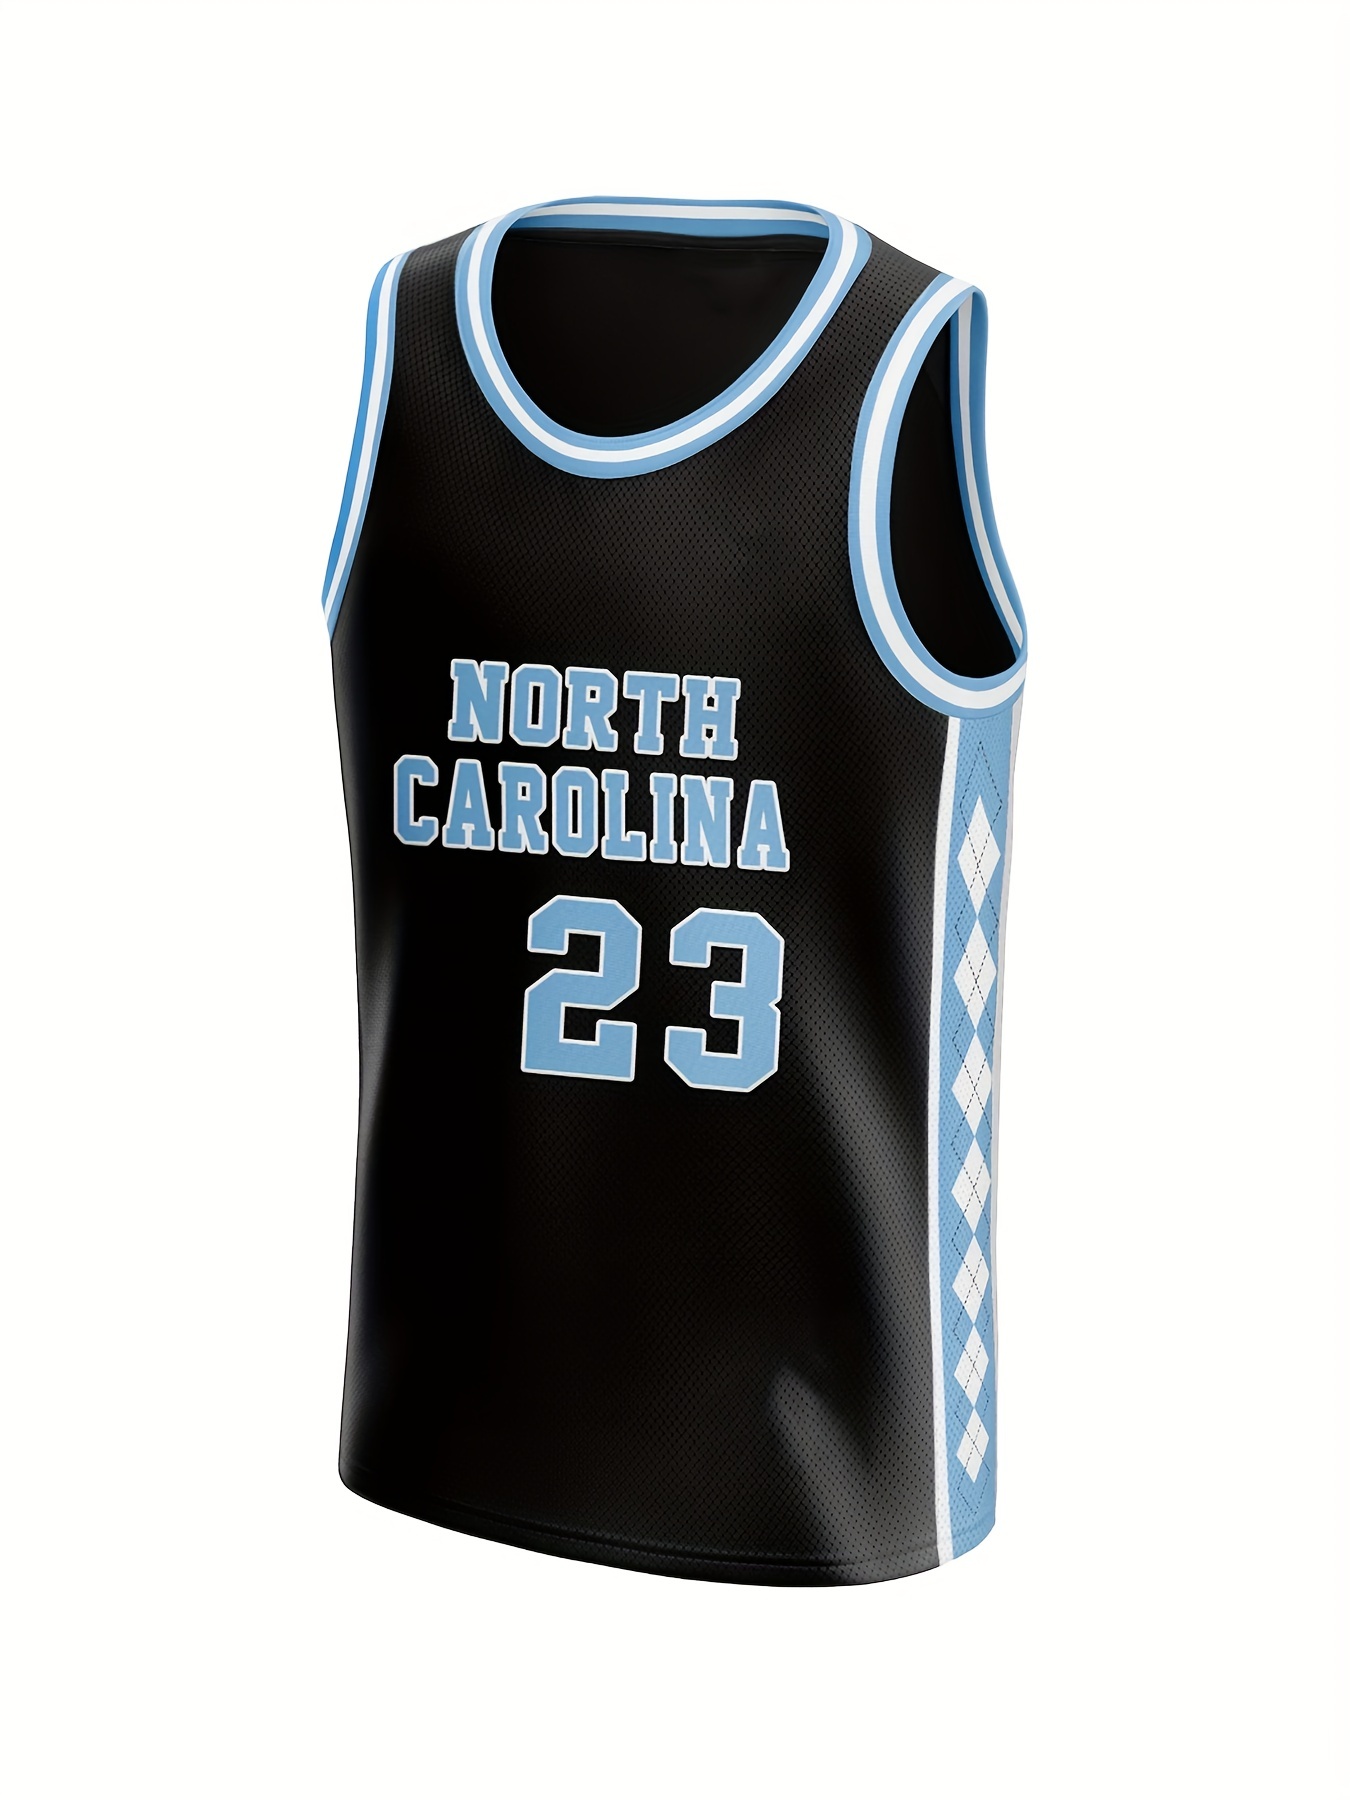 Temu Men's North Carolina #23 Embroidery Basketball Jersey, Vintage Breathable Round Neck Sleeveless Basketball Shirt for Training Competition